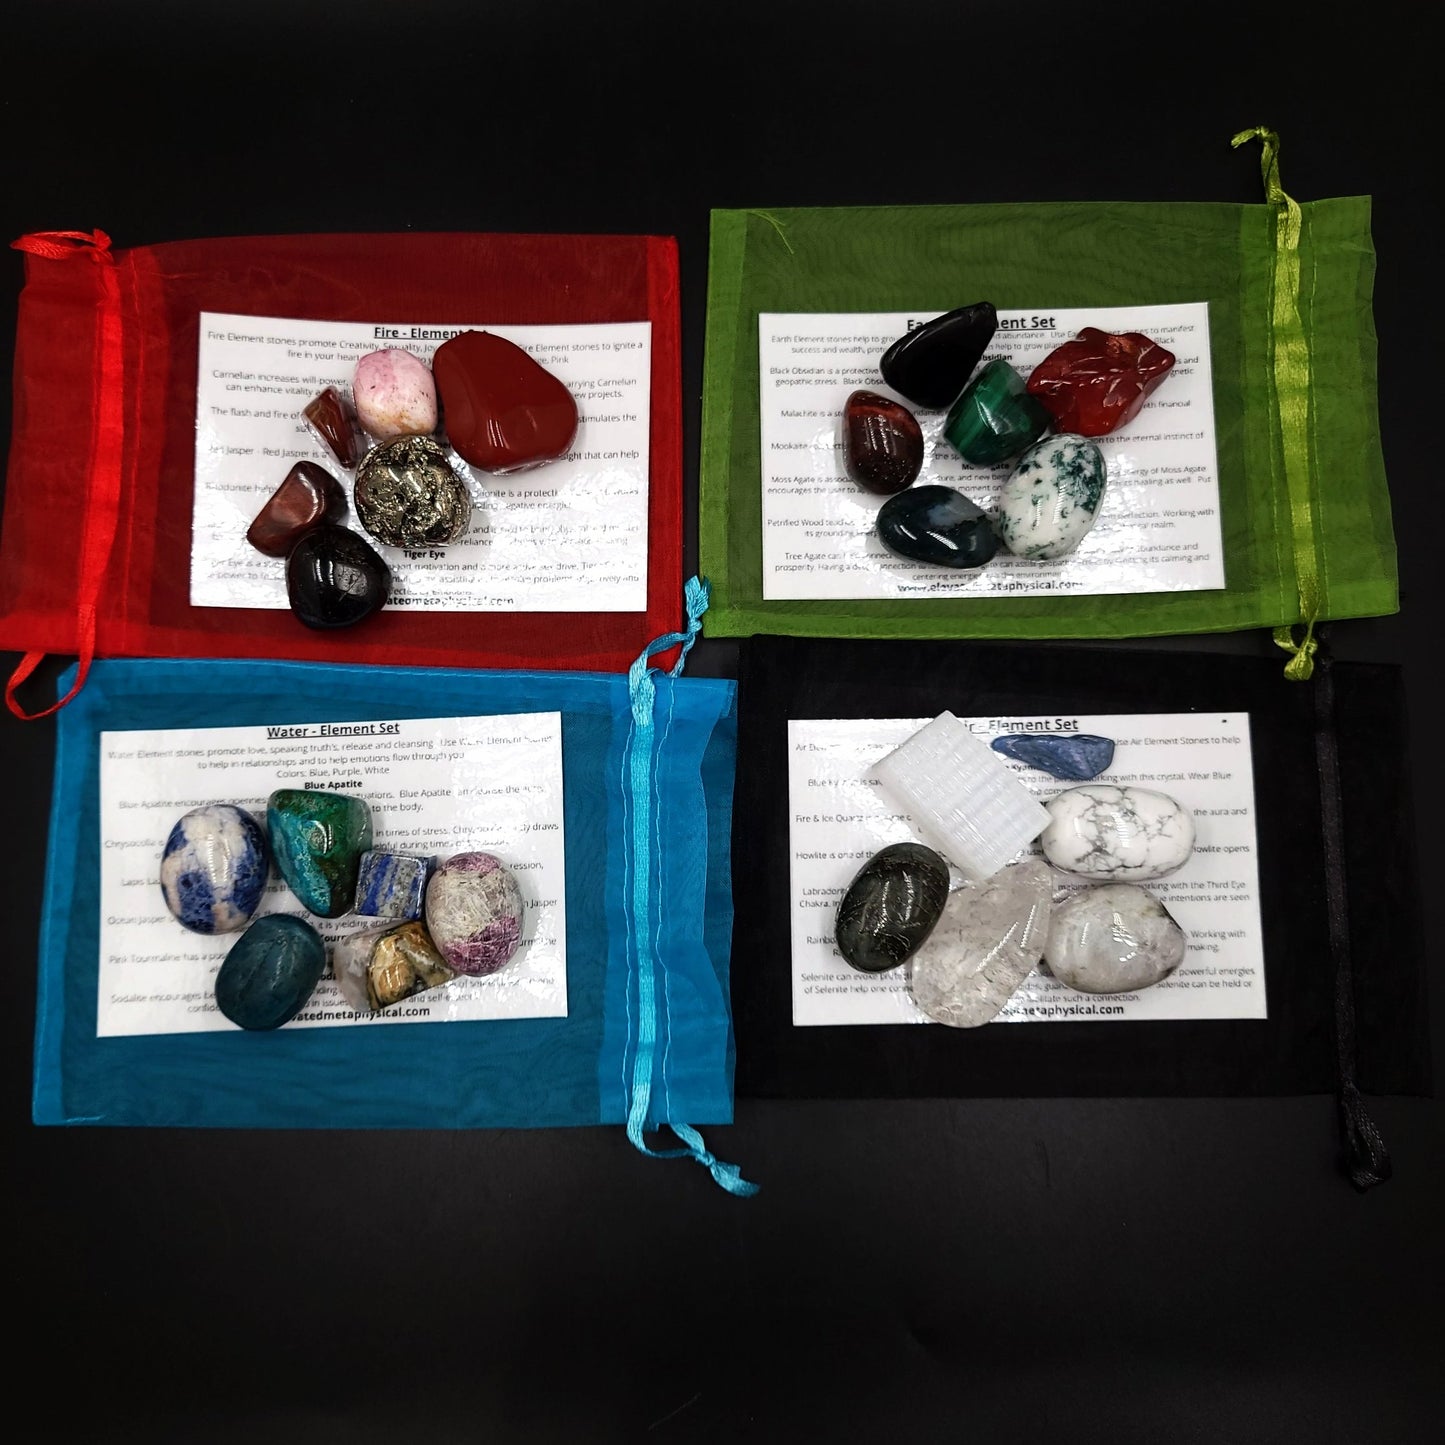 The Four Elements - Element Stone Set - Elevated Metaphysical